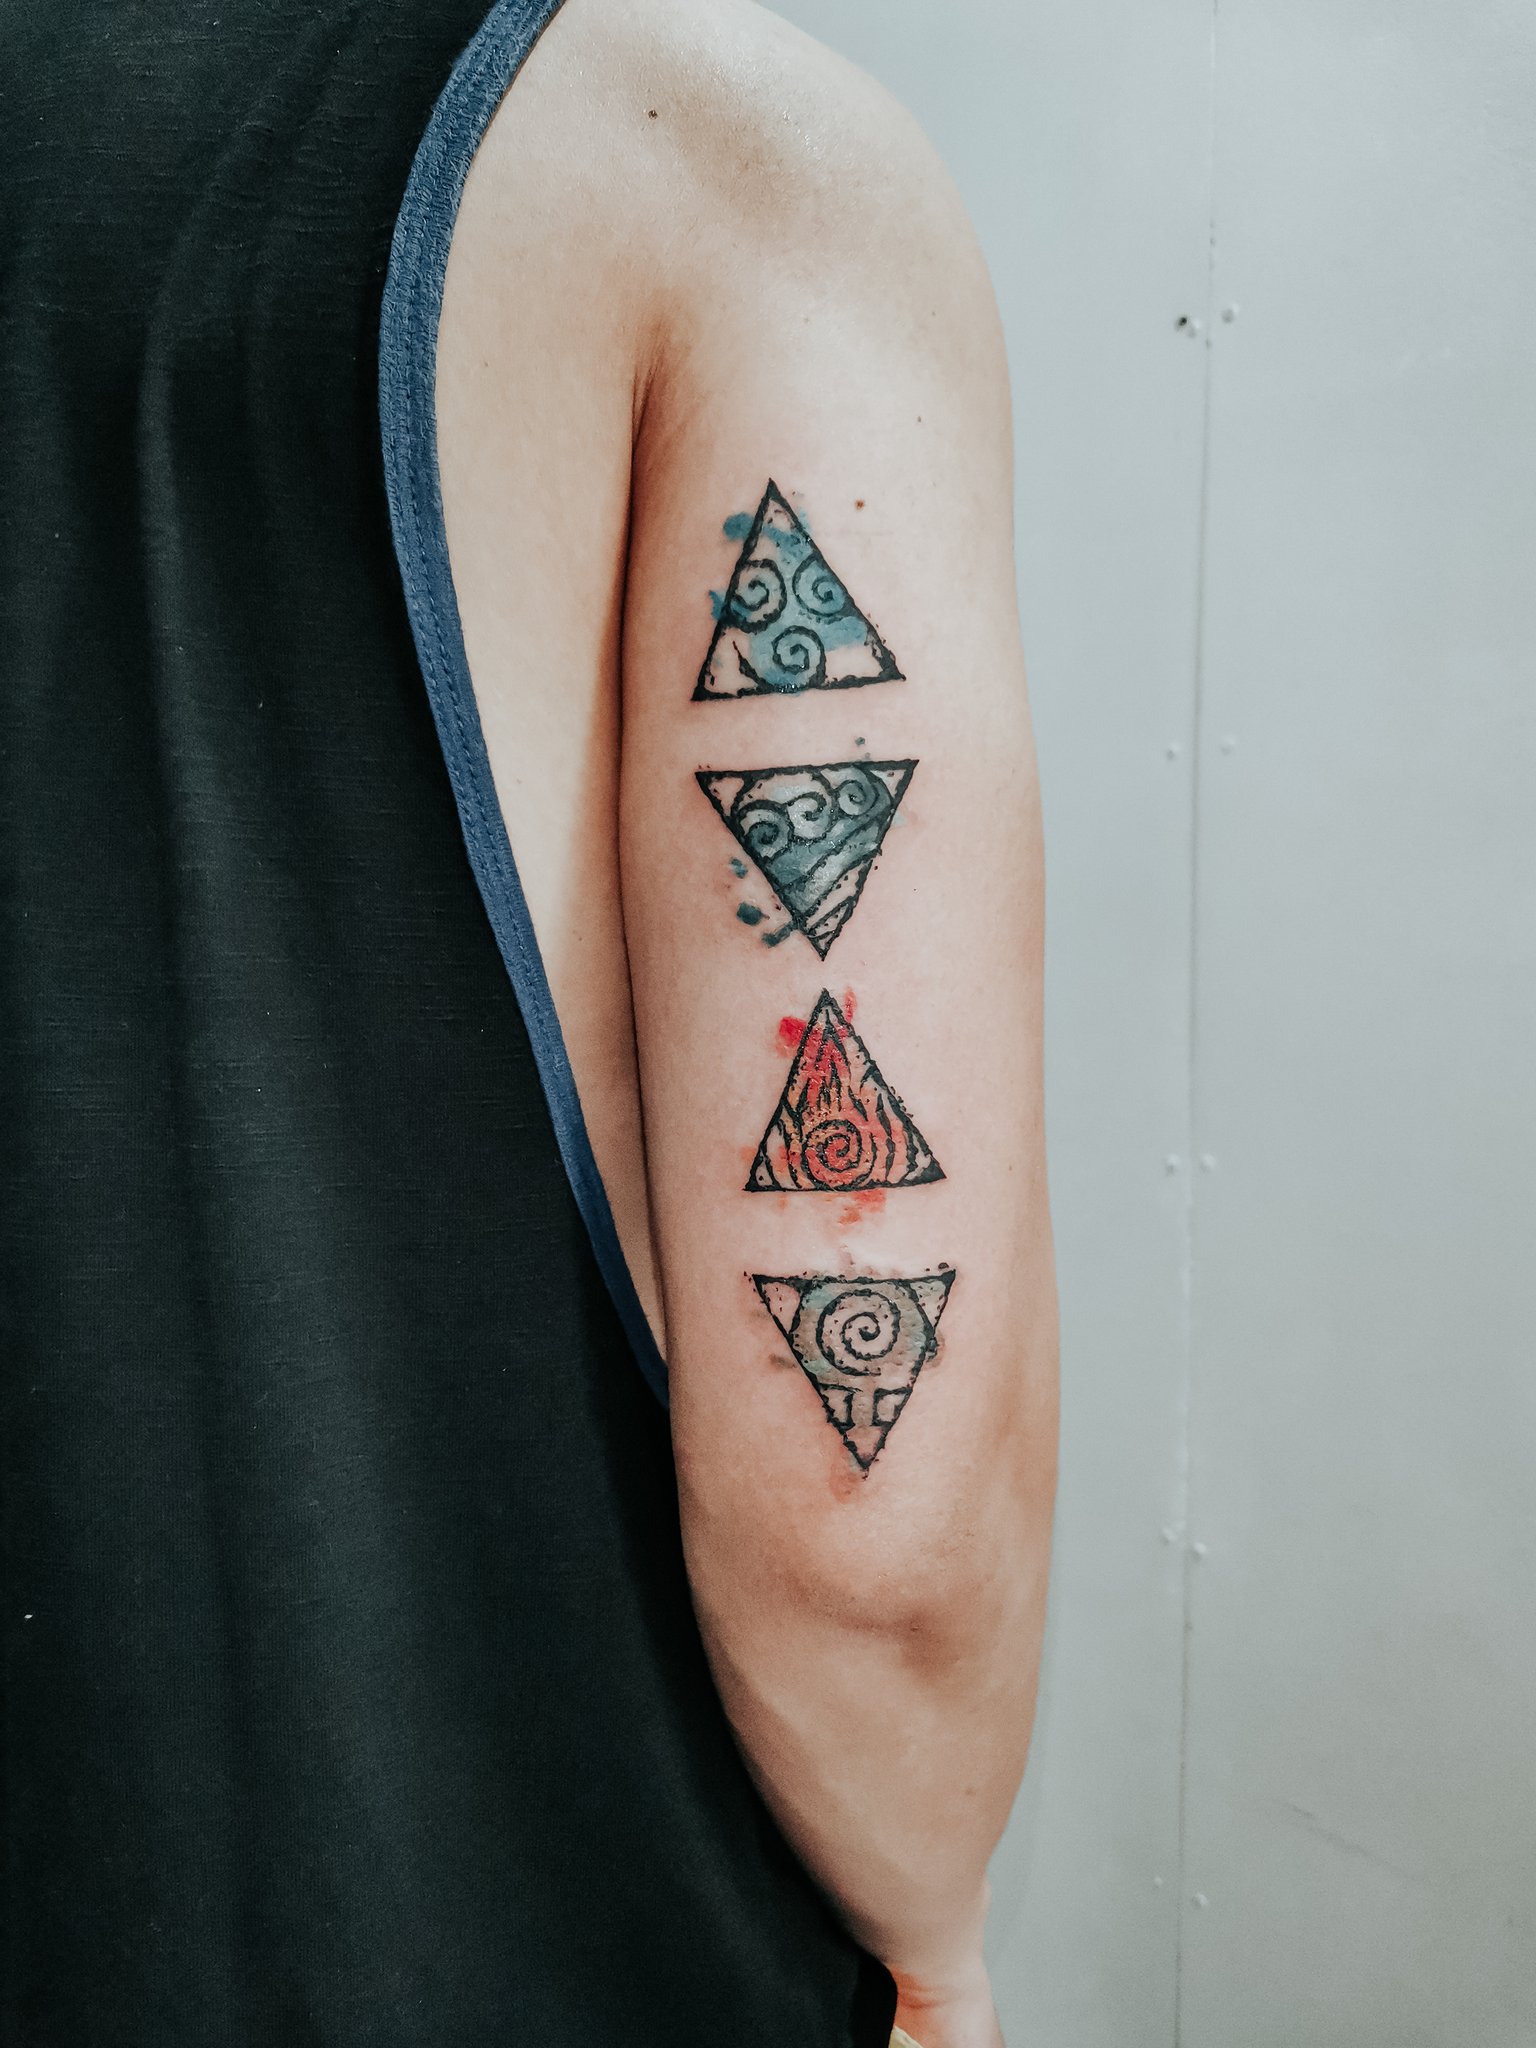 Update 80+ about 5 elements tattoo unmissable .vn